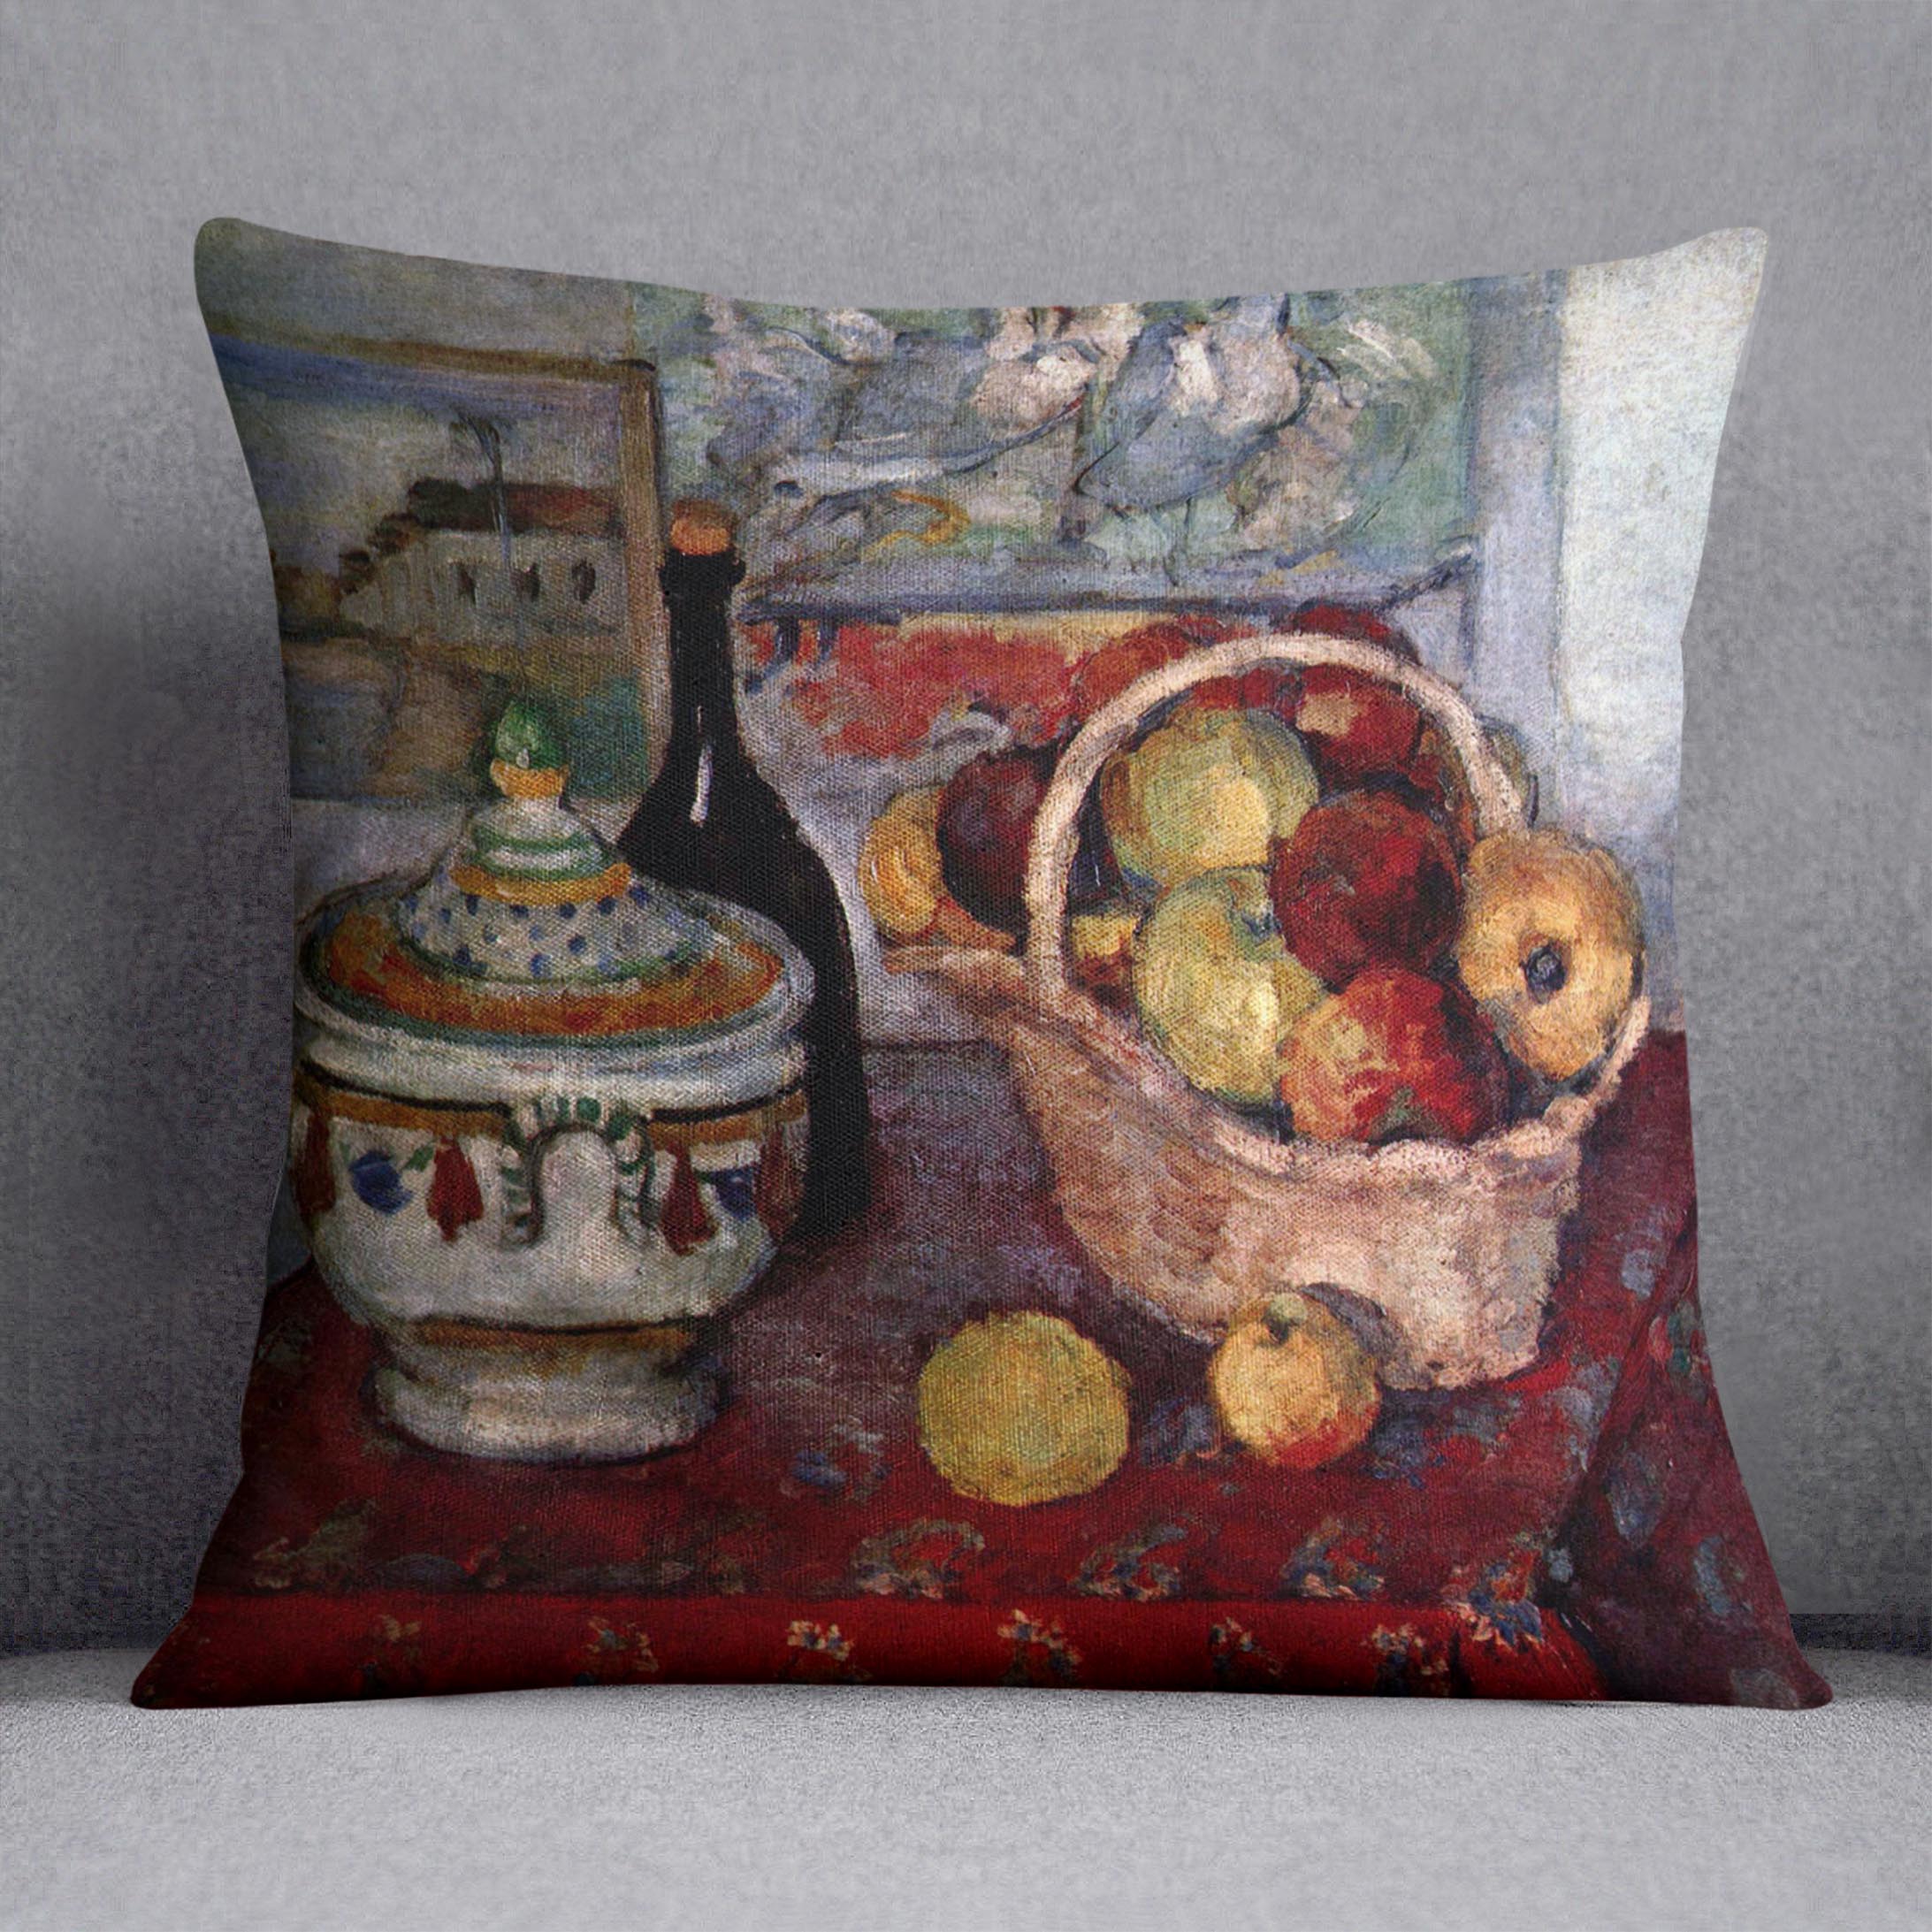 Still life with soup tureen by Cezanne Cushion - Canvas Art Rocks - 1